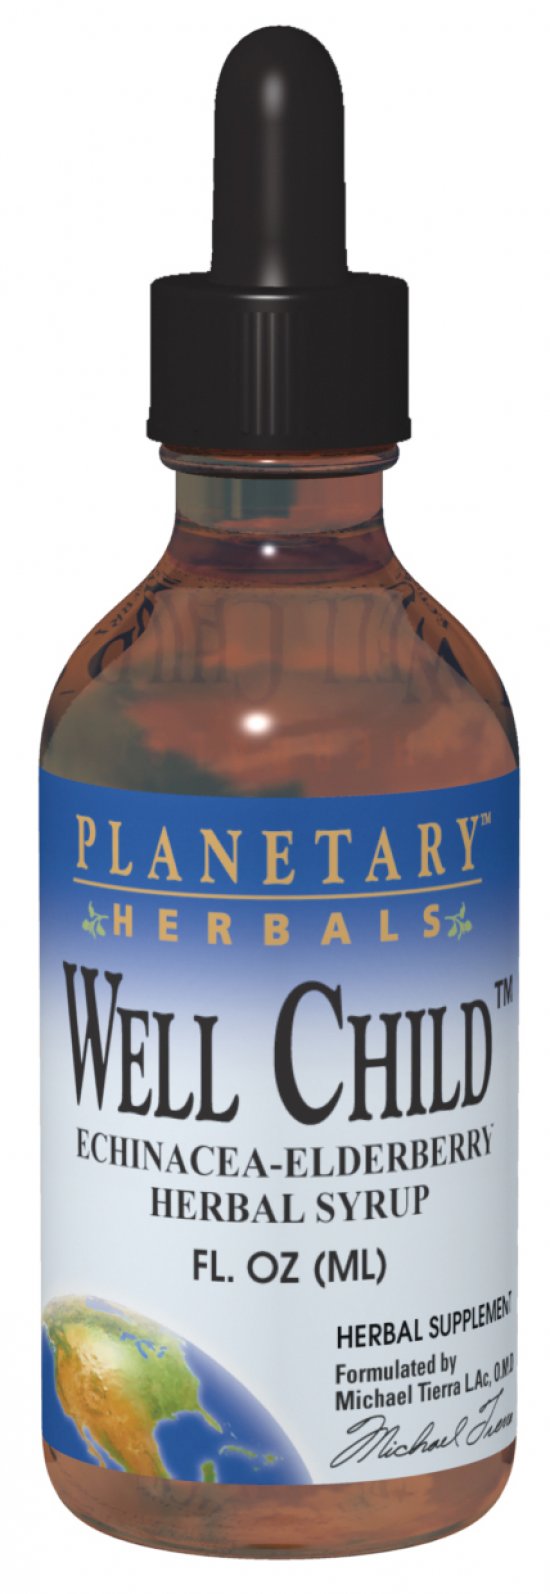 PLANETARY HERBALS: Well Child Echinacea-Elderberry Syrup 8 fl oz